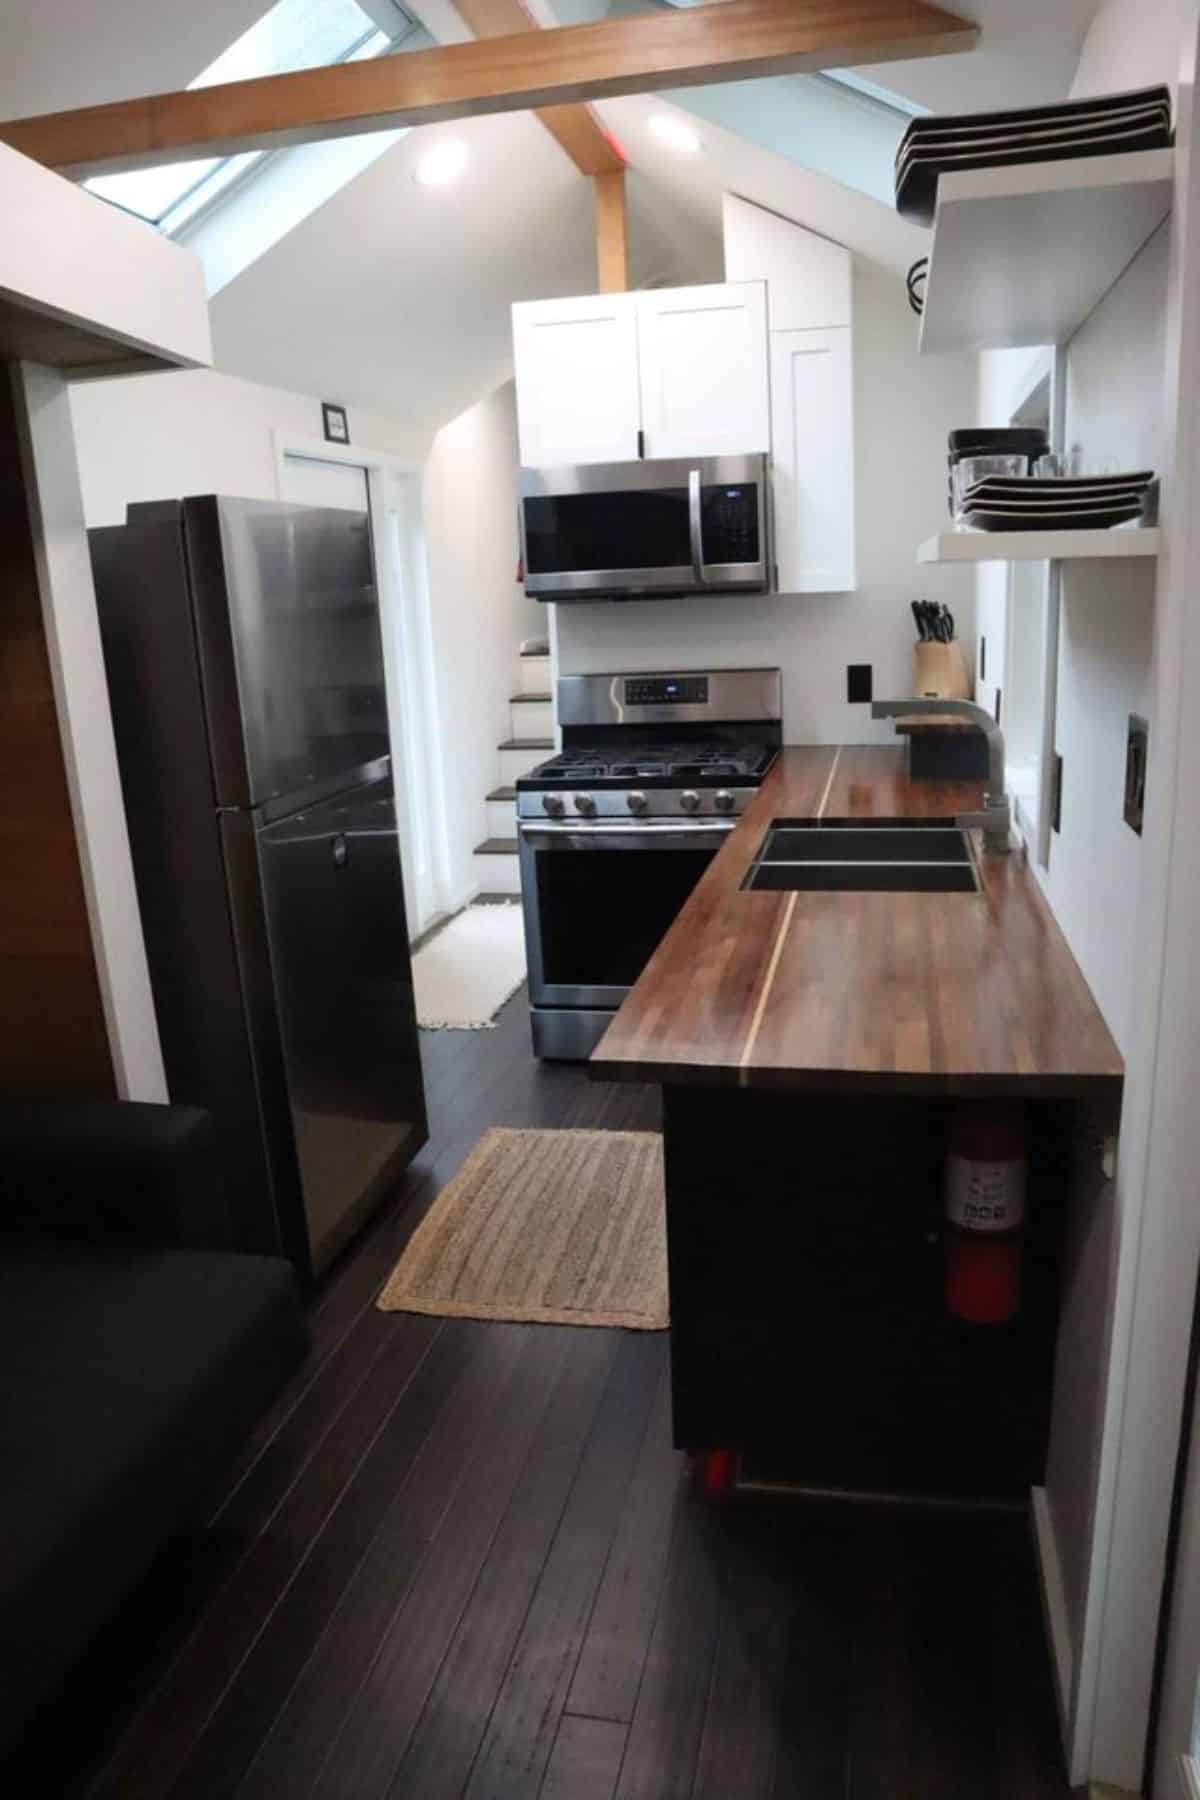 Refrigerator, oven, stove all included in the kitchen